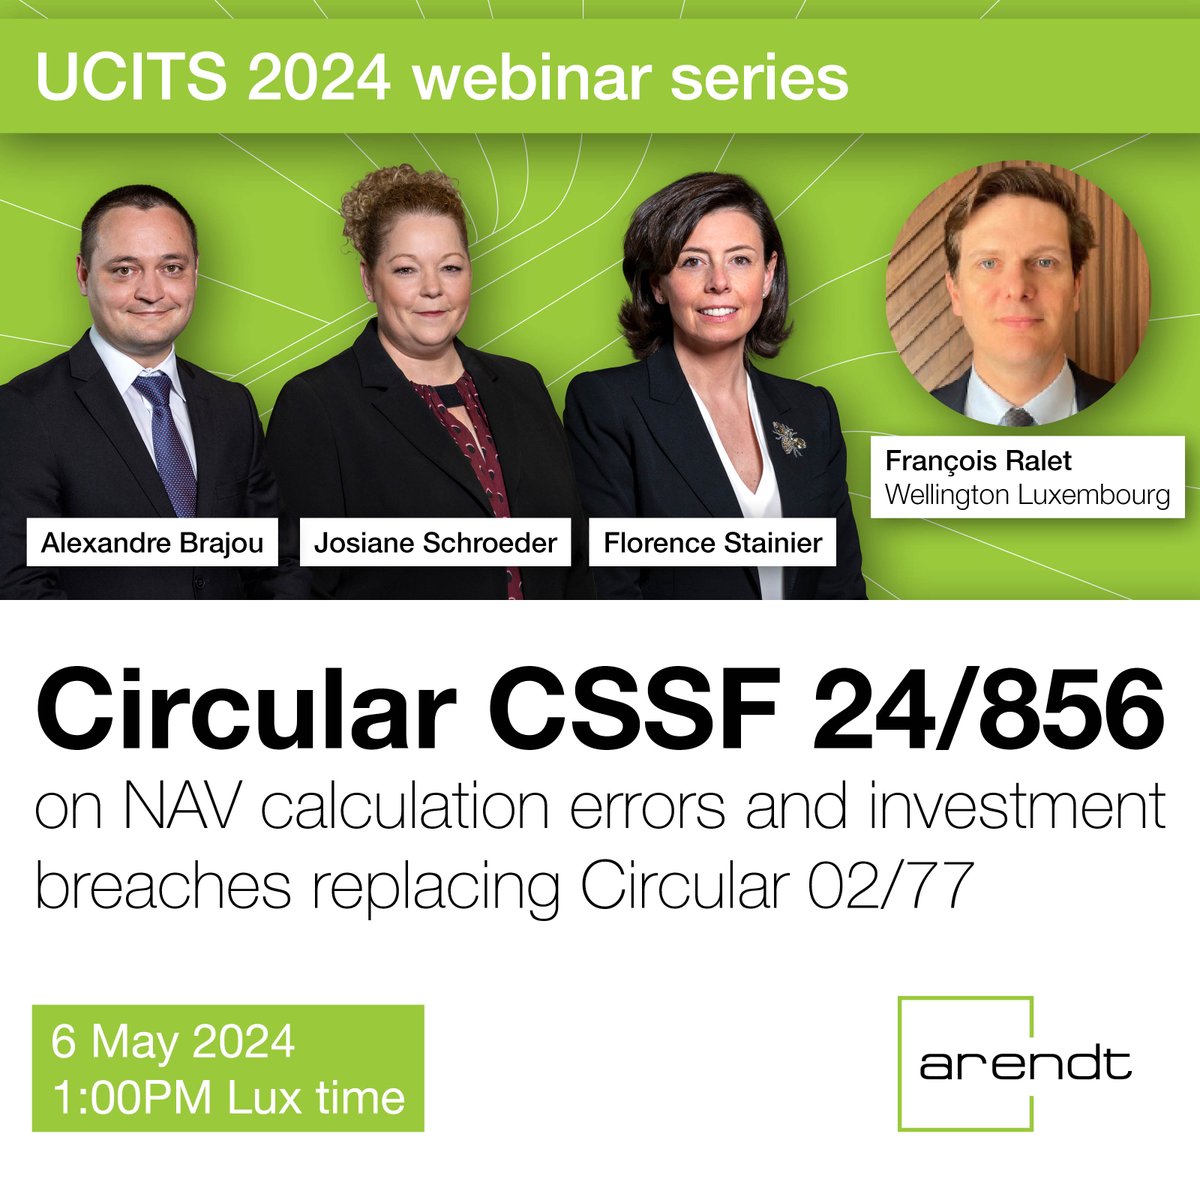 💻 Register NOW for the first episode of our “2024 UCITS webinar series” and discover the new features of the recently published Circular CSSF 24/856 on investor protection in the event of a NAV calculation error, non-compliance with investment rules and other errors.

💡 This…